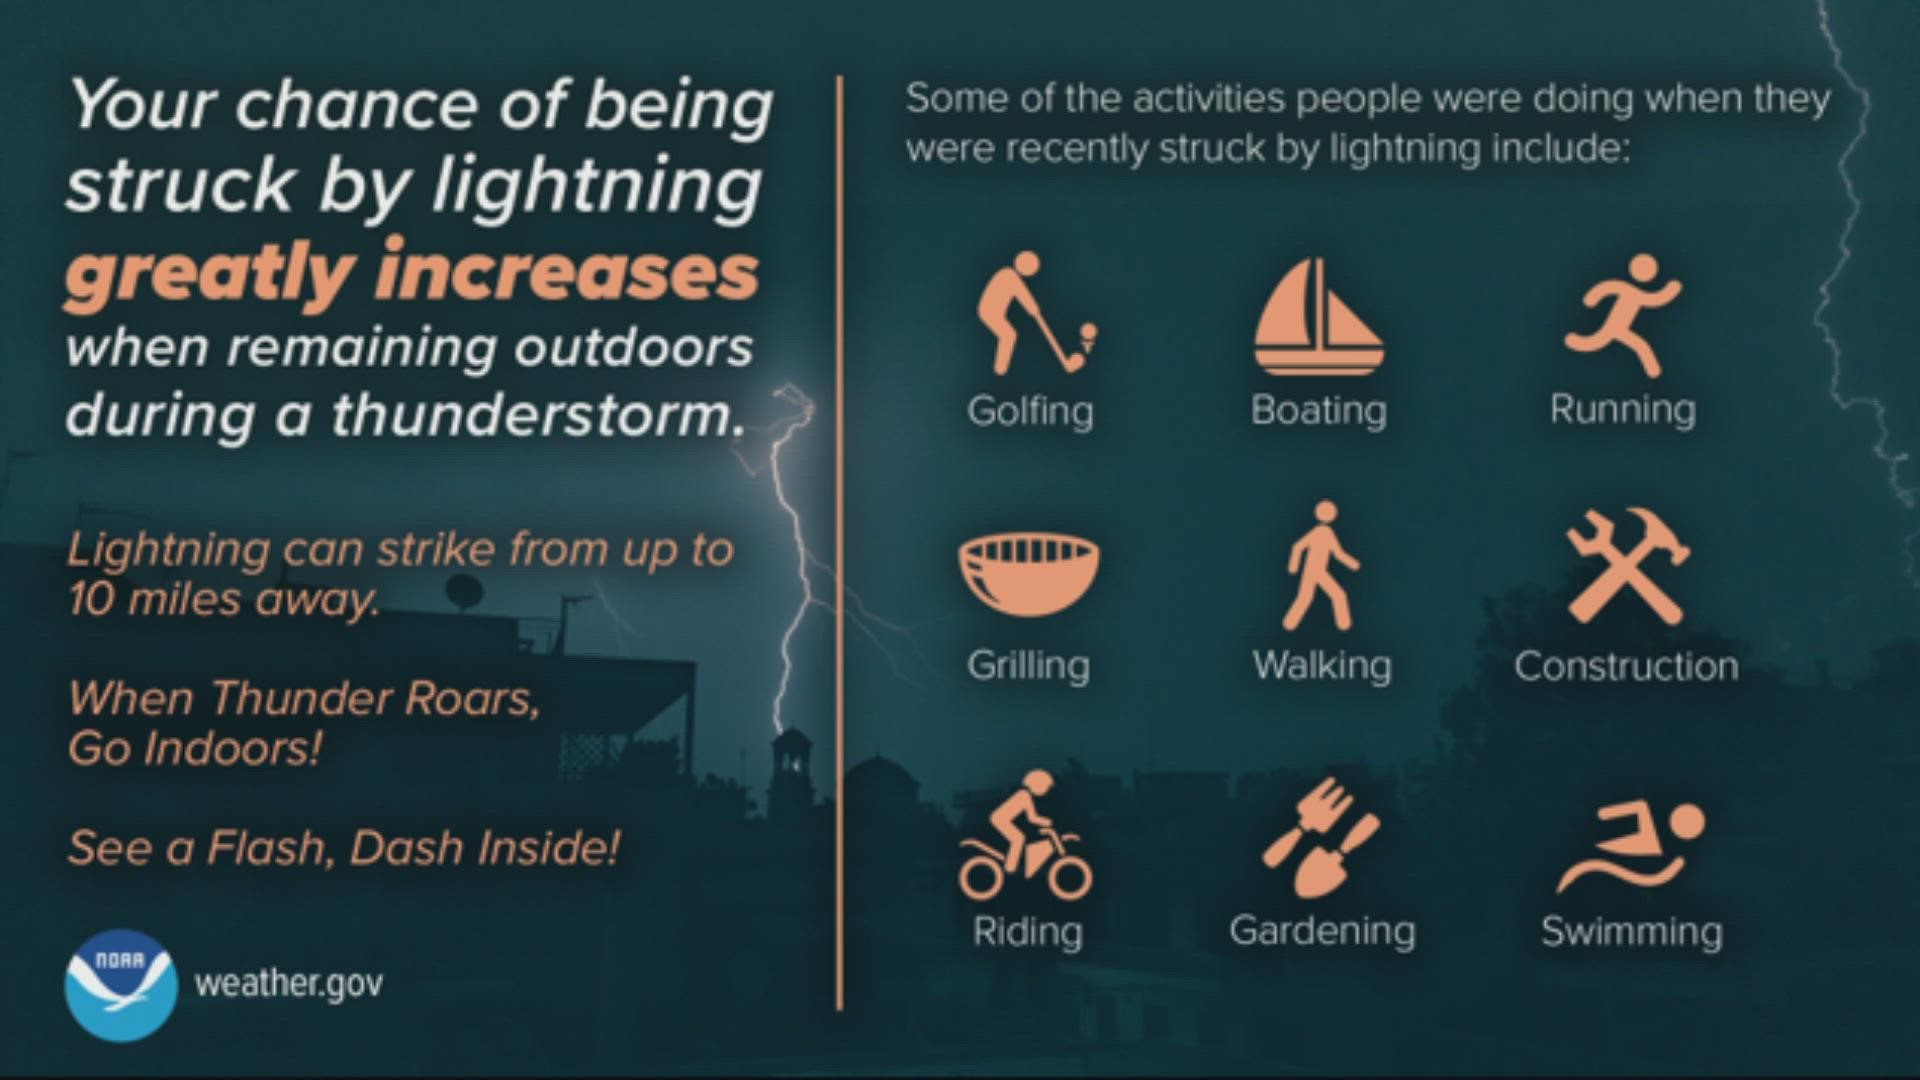 Lightning can strike from up to 10 miles away.